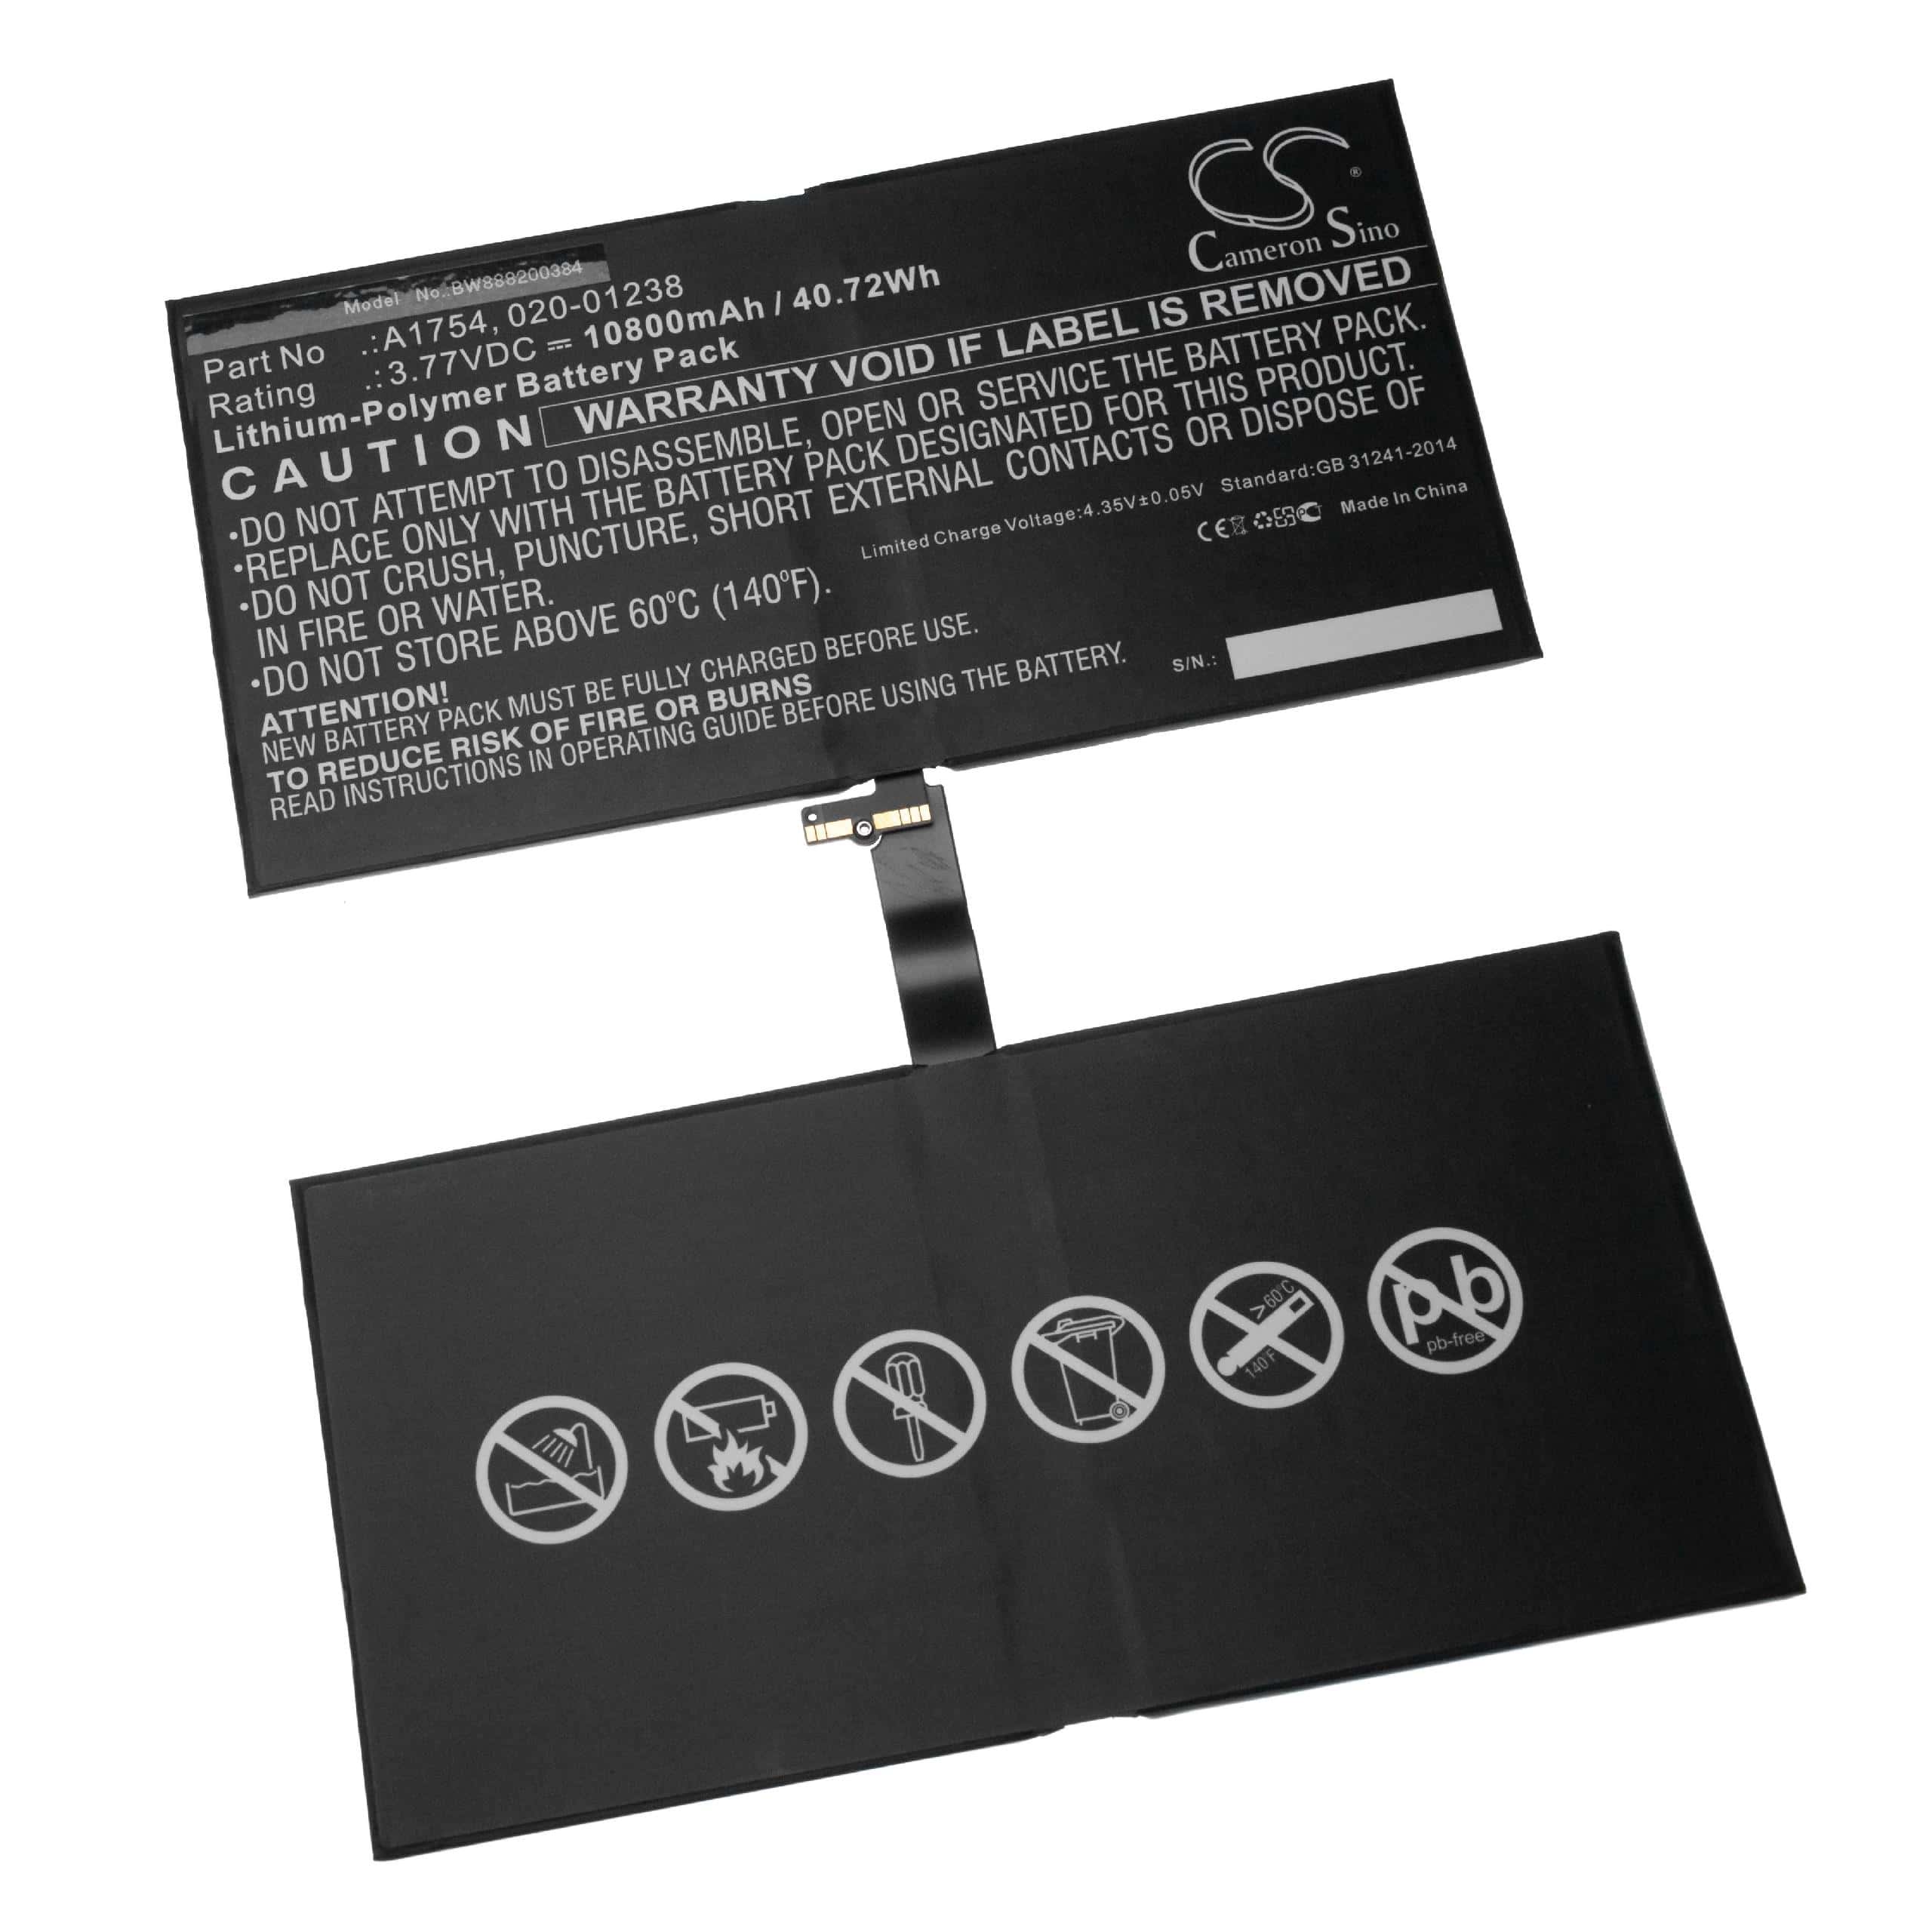 Notebook Battery Replacement for Apple A1754, 020-01238 - 10800mAh 3.77V Li-polymer